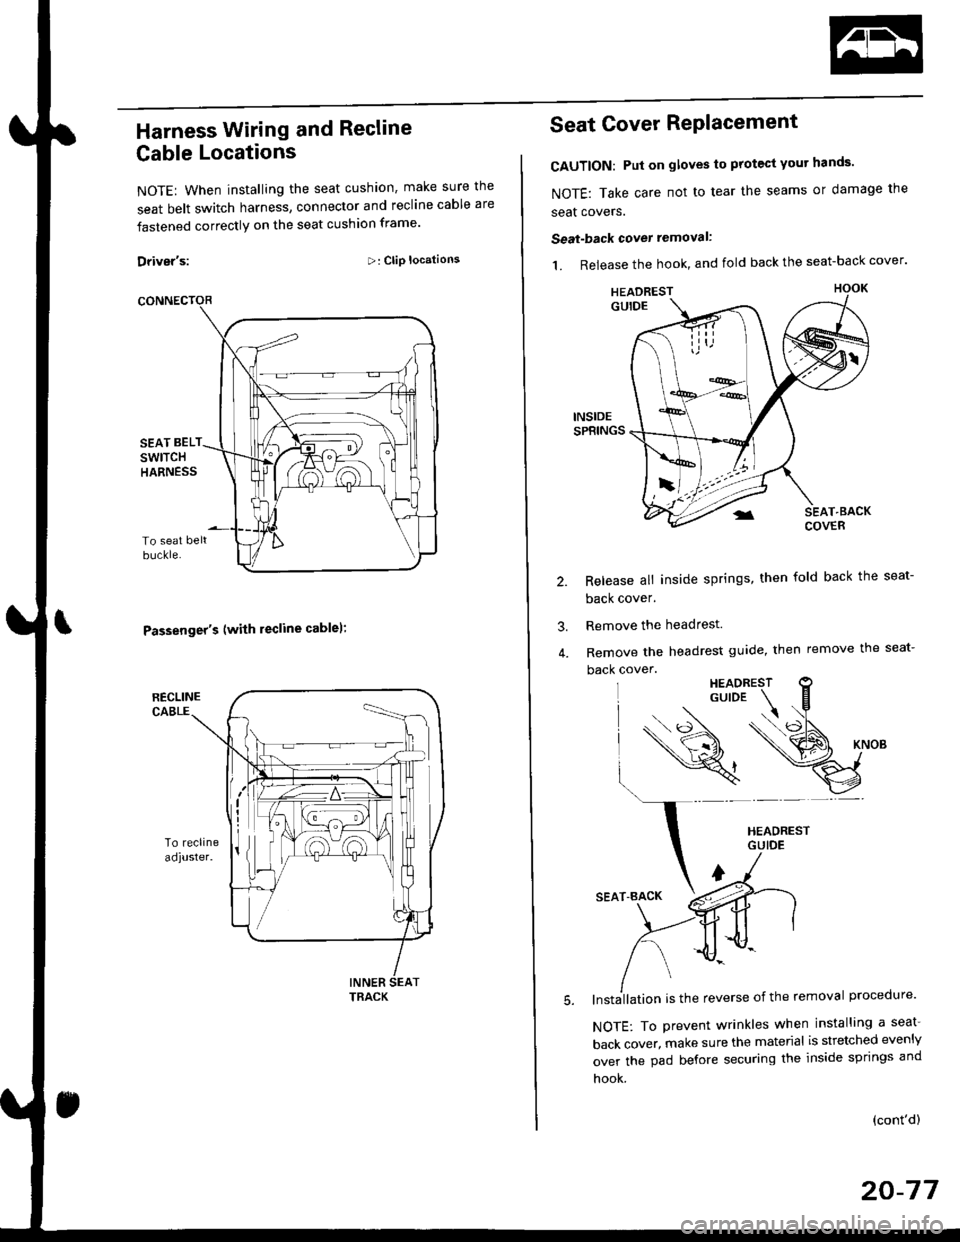 HONDA CIVIC 1998 6.G Workshop Manual Harness Wiring and Recline
Cable Locations
NOTE: When installing the seat cushion, make sure the
seat belt switch harness, connector and recline cable are
fastened correctly on the seat cushion frame